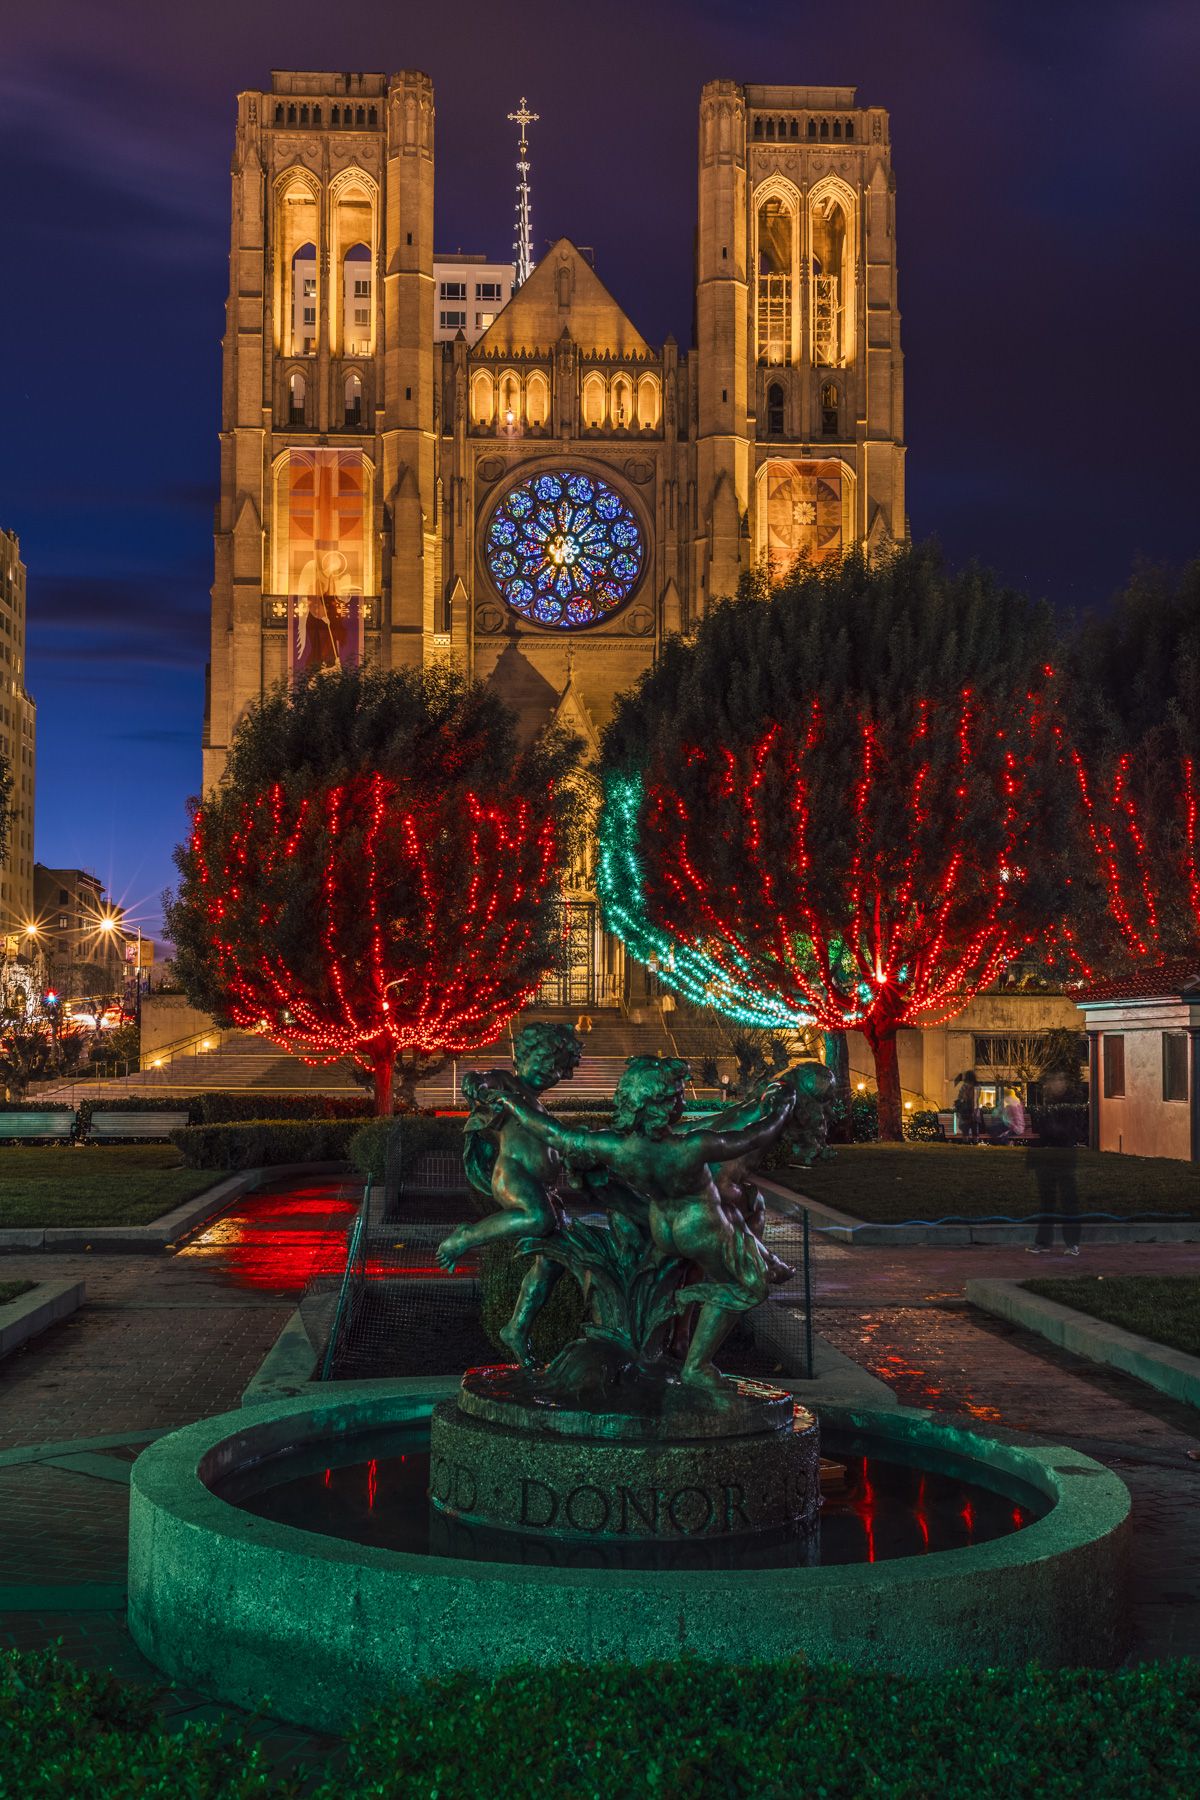 Statues of cherubs playing in the center of a fountain glowing with green light, with rees decorated with red Christmas lights in front of Grace Cathedral in San Francisco, seen at night glowing with yellow light.